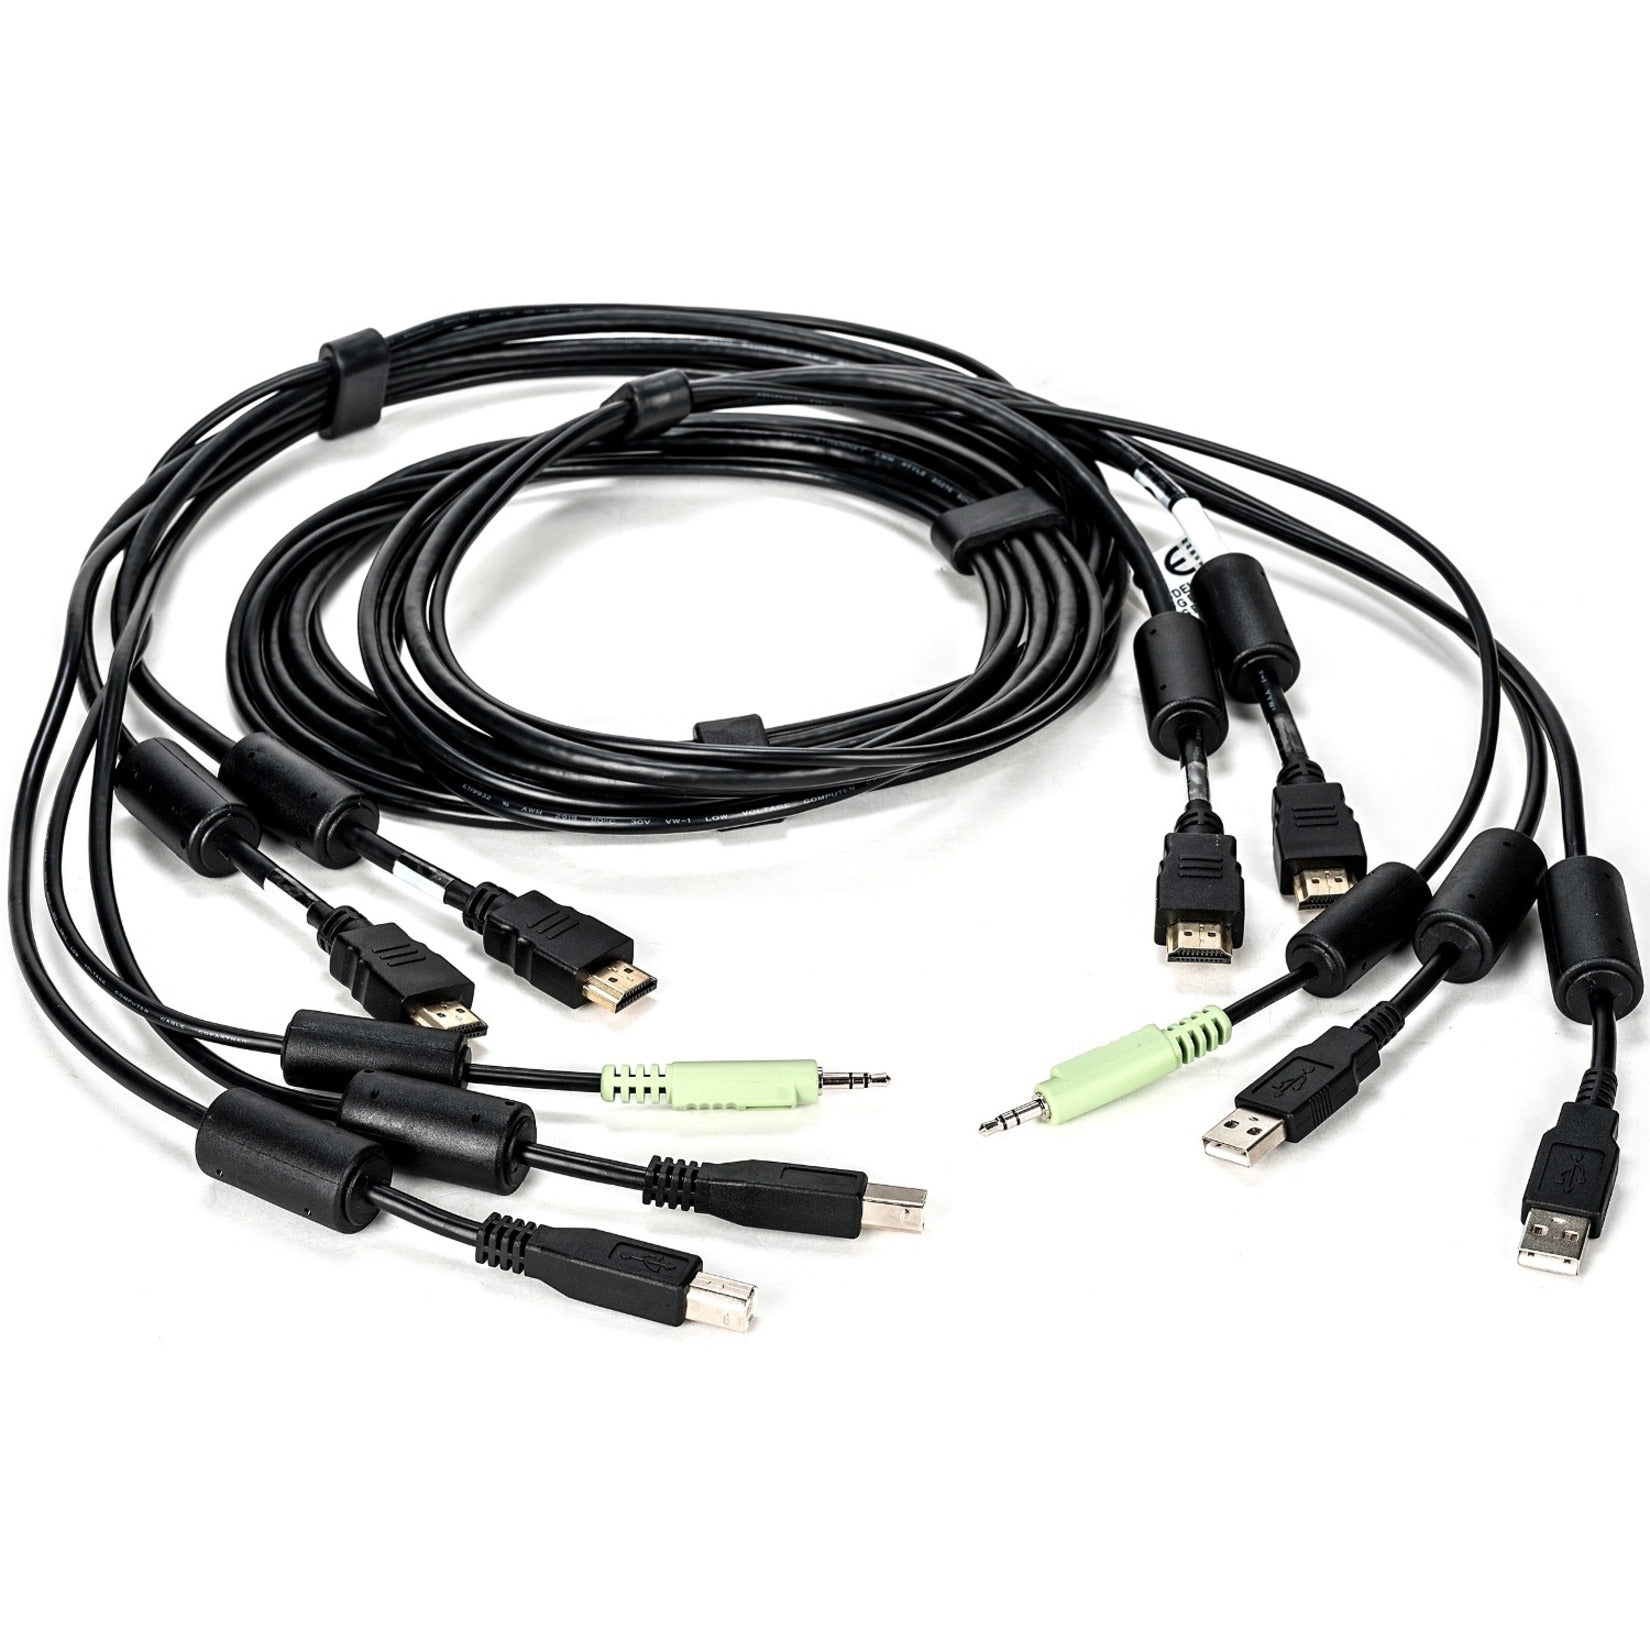 AVOCENT CBL0116 KVM Cable, Dual HDMI and Audio, 6 ft. for Vertiv Avocent SV and SC Series Switches